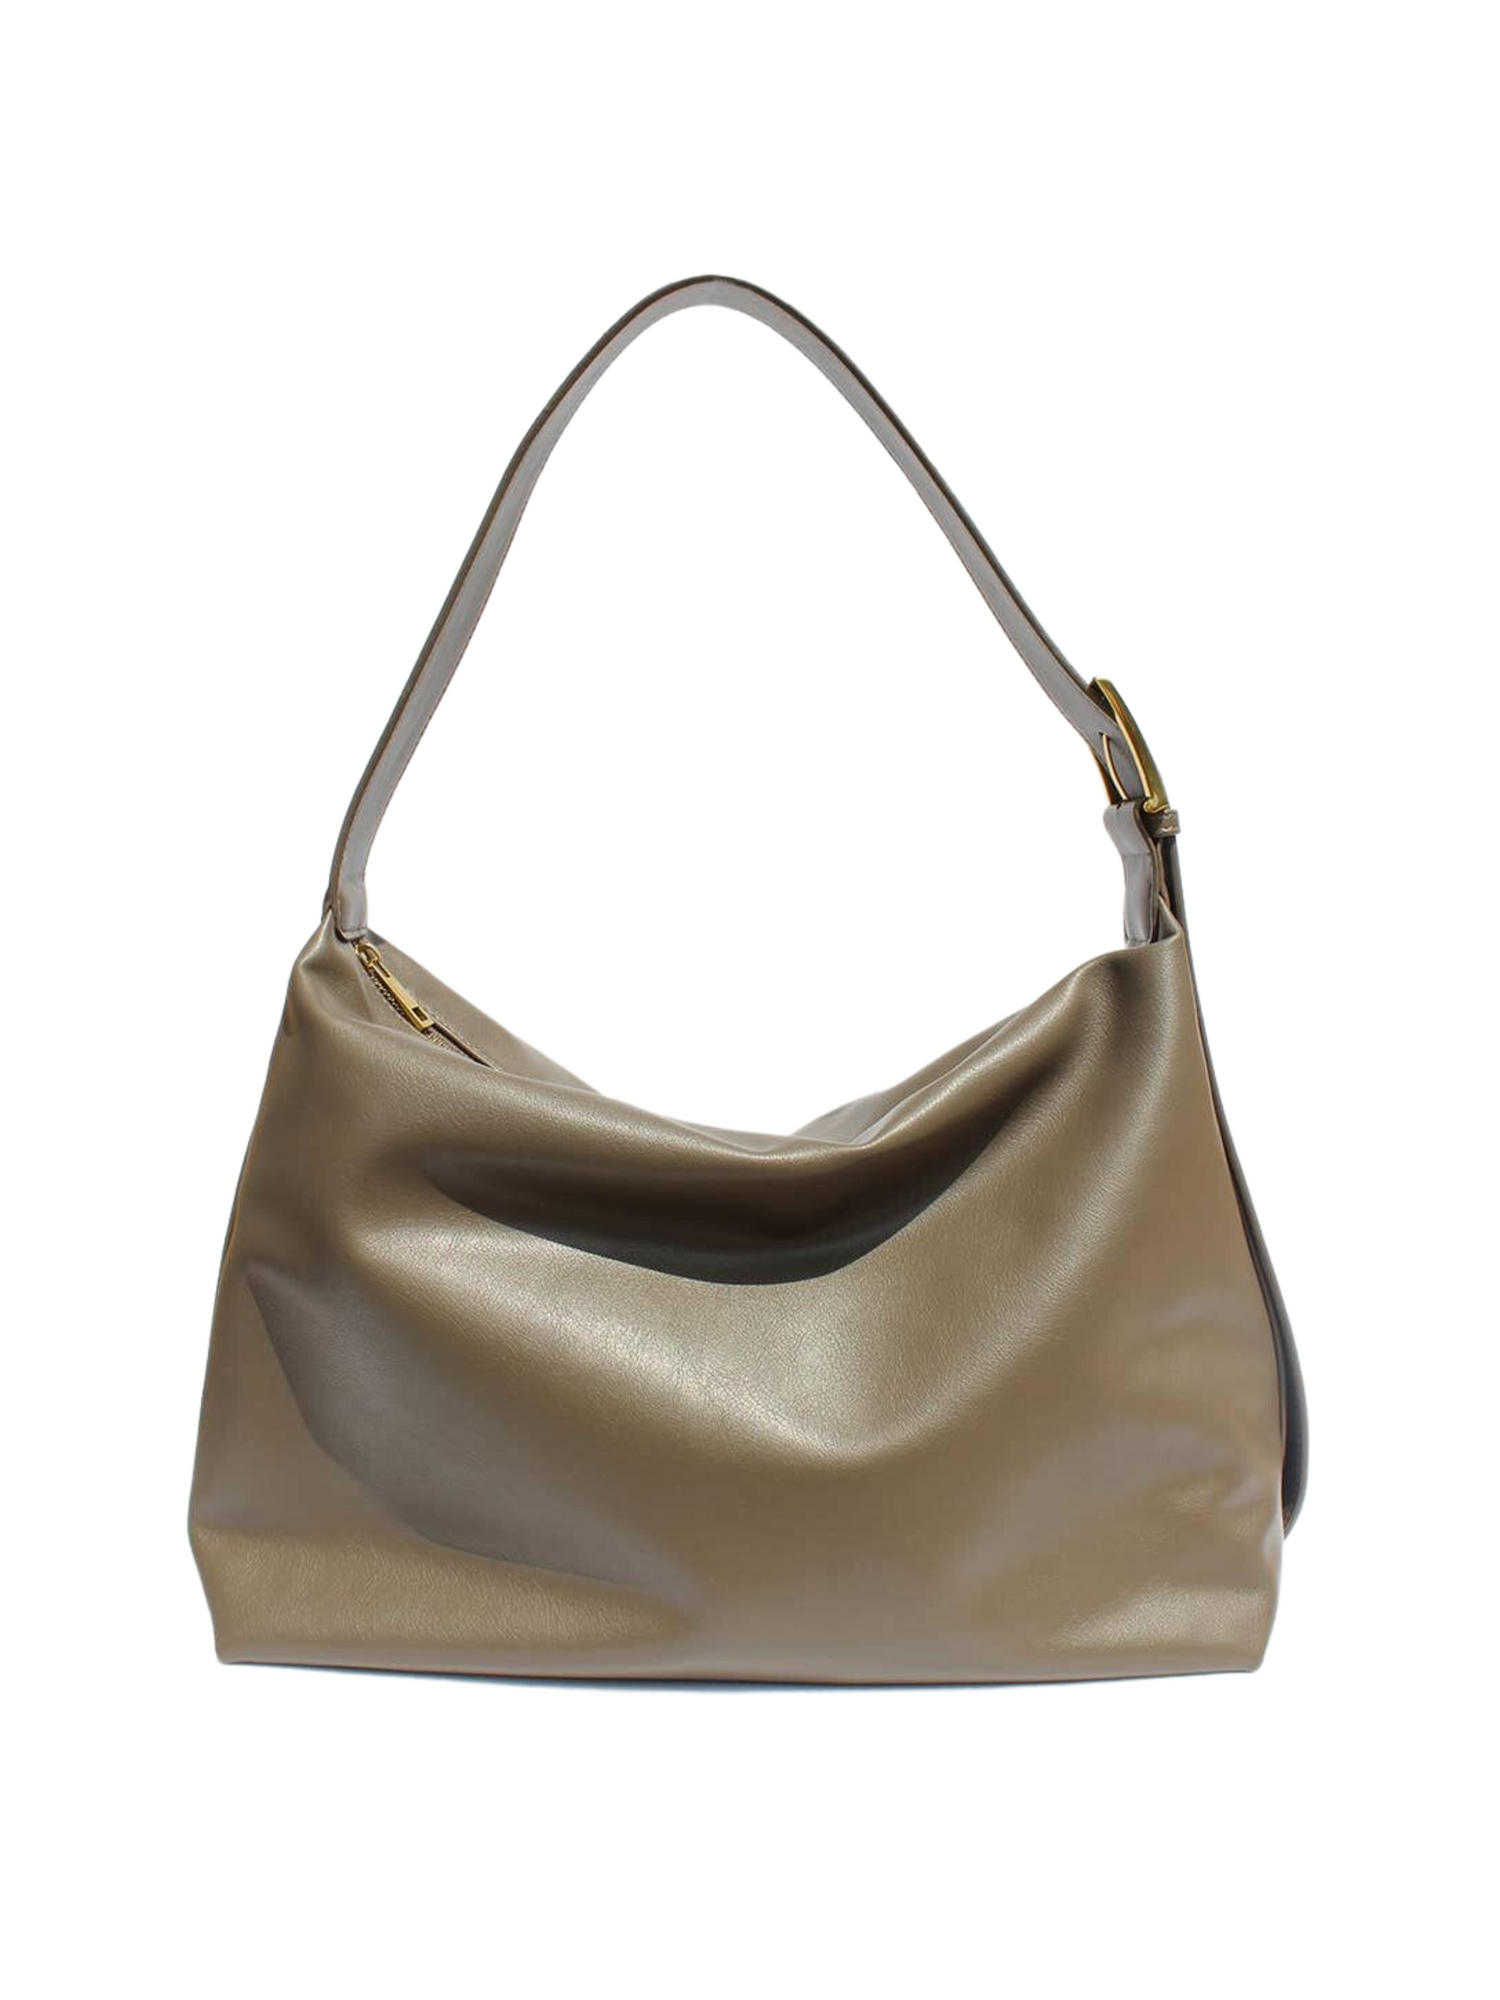 TAUPE LEATHER SLOUCHY BUCKET BAG | THE HIP EAGLE BOUTIQUE